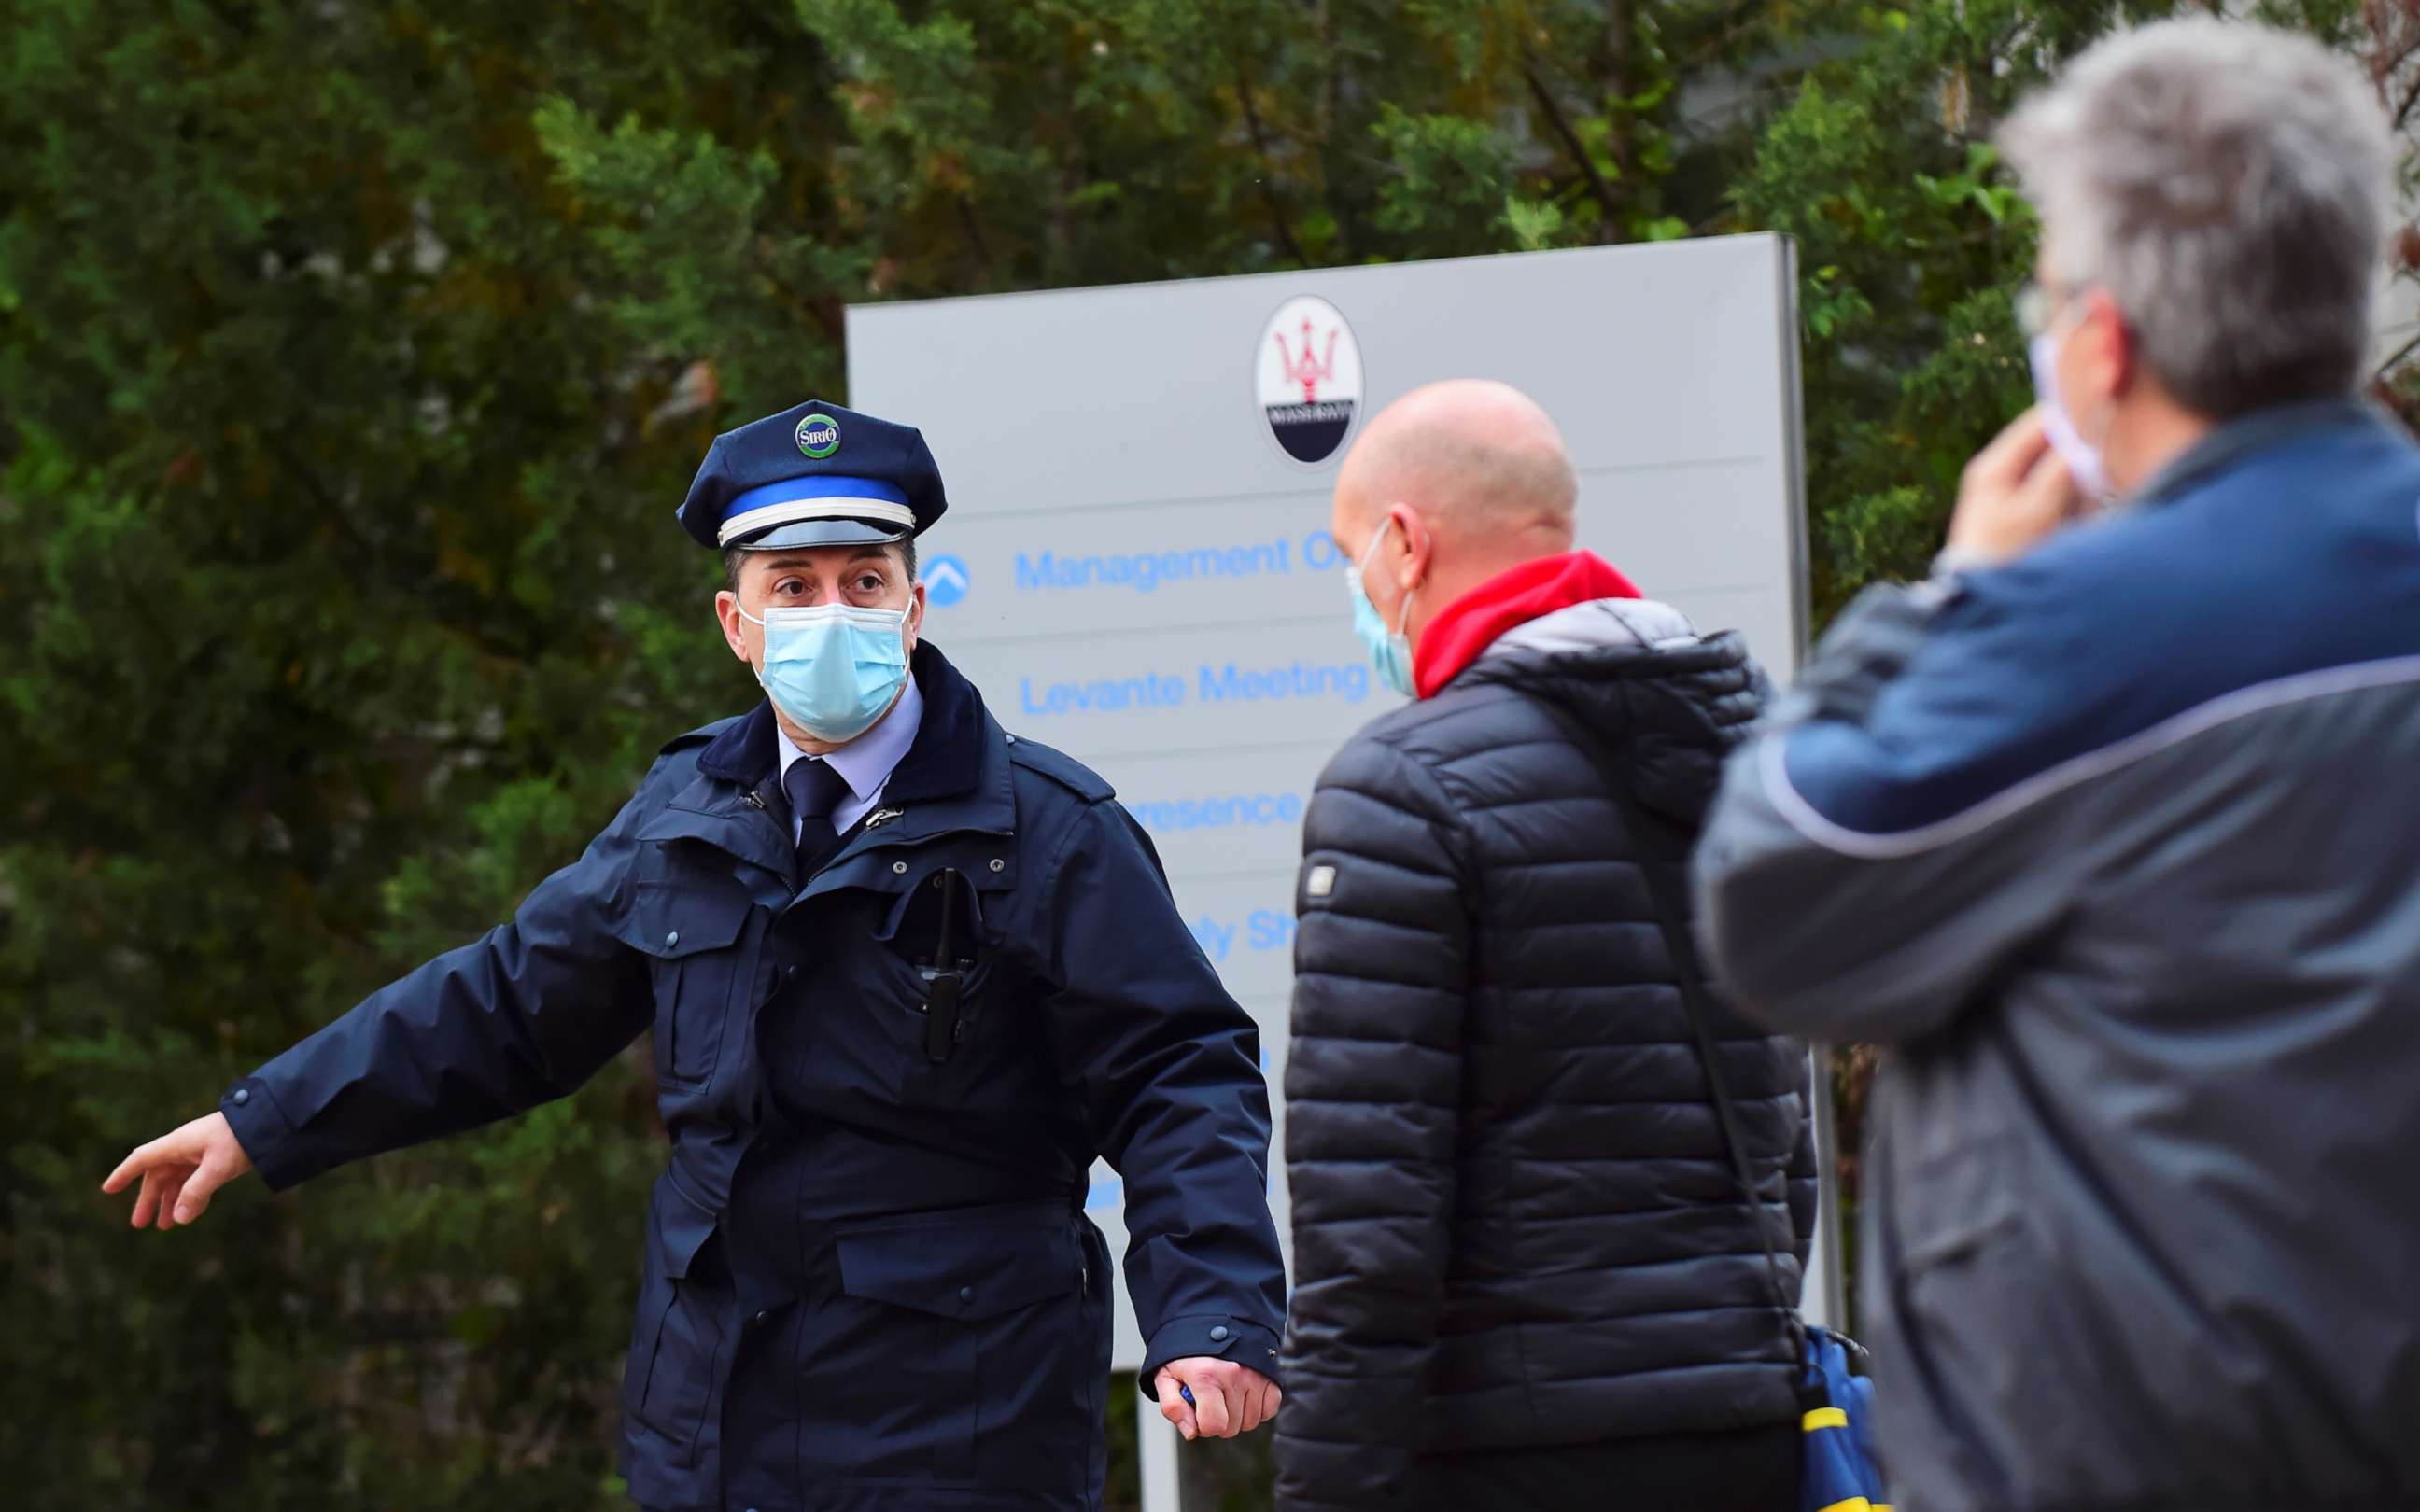 PHOTO: An employee gestures as people enter the FCA Mirafiori plant as it resumes its operations after closure during a lockdown amid the coronavirus disease (COVID-19) outbreak in Turin, Italy April 27, 2020.